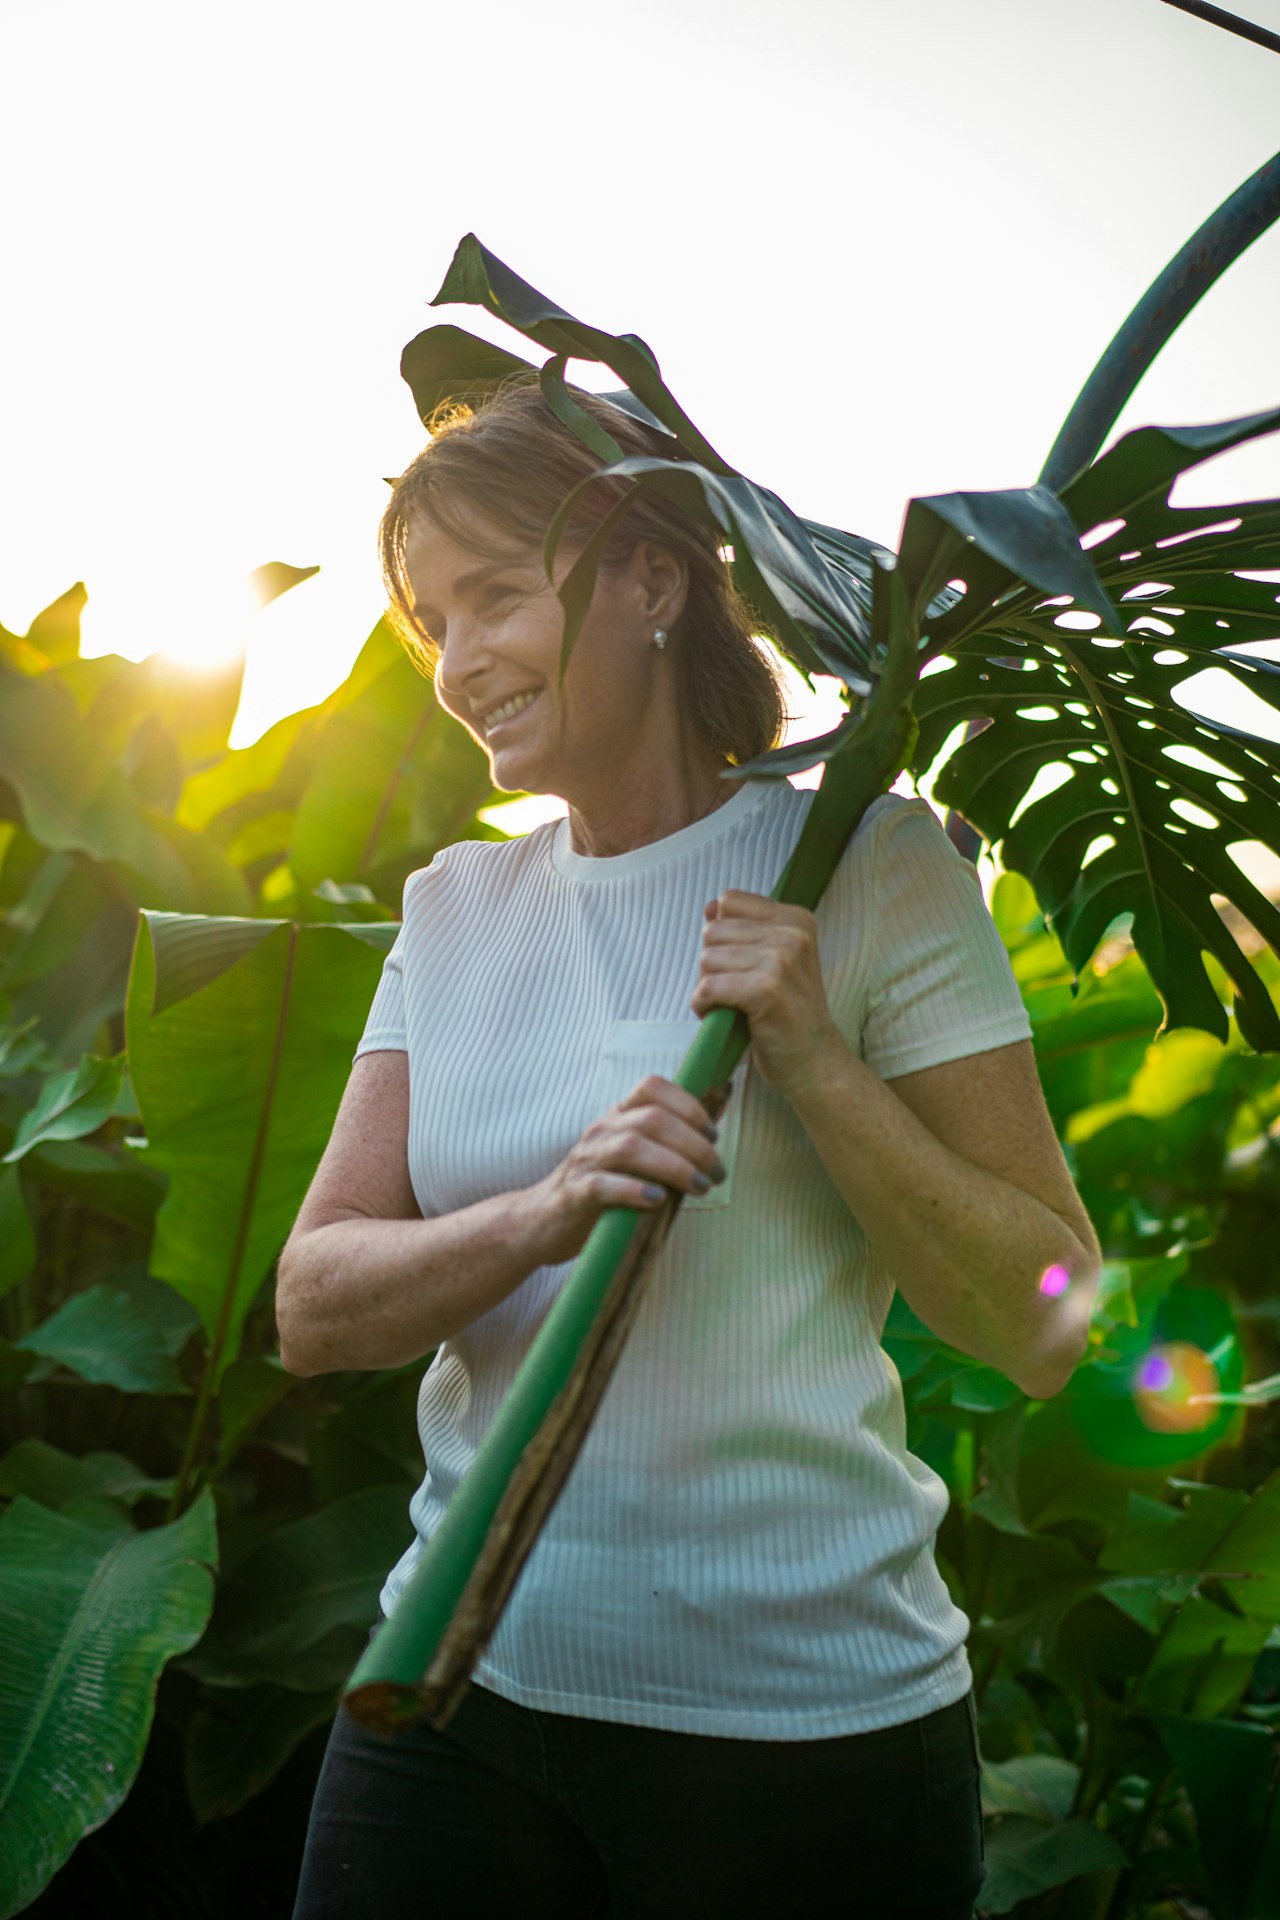 Smiling woman standing amid large green leaves on a sunny day, holding a long-handled gardening tool over her shoulder with sun flares in the background.